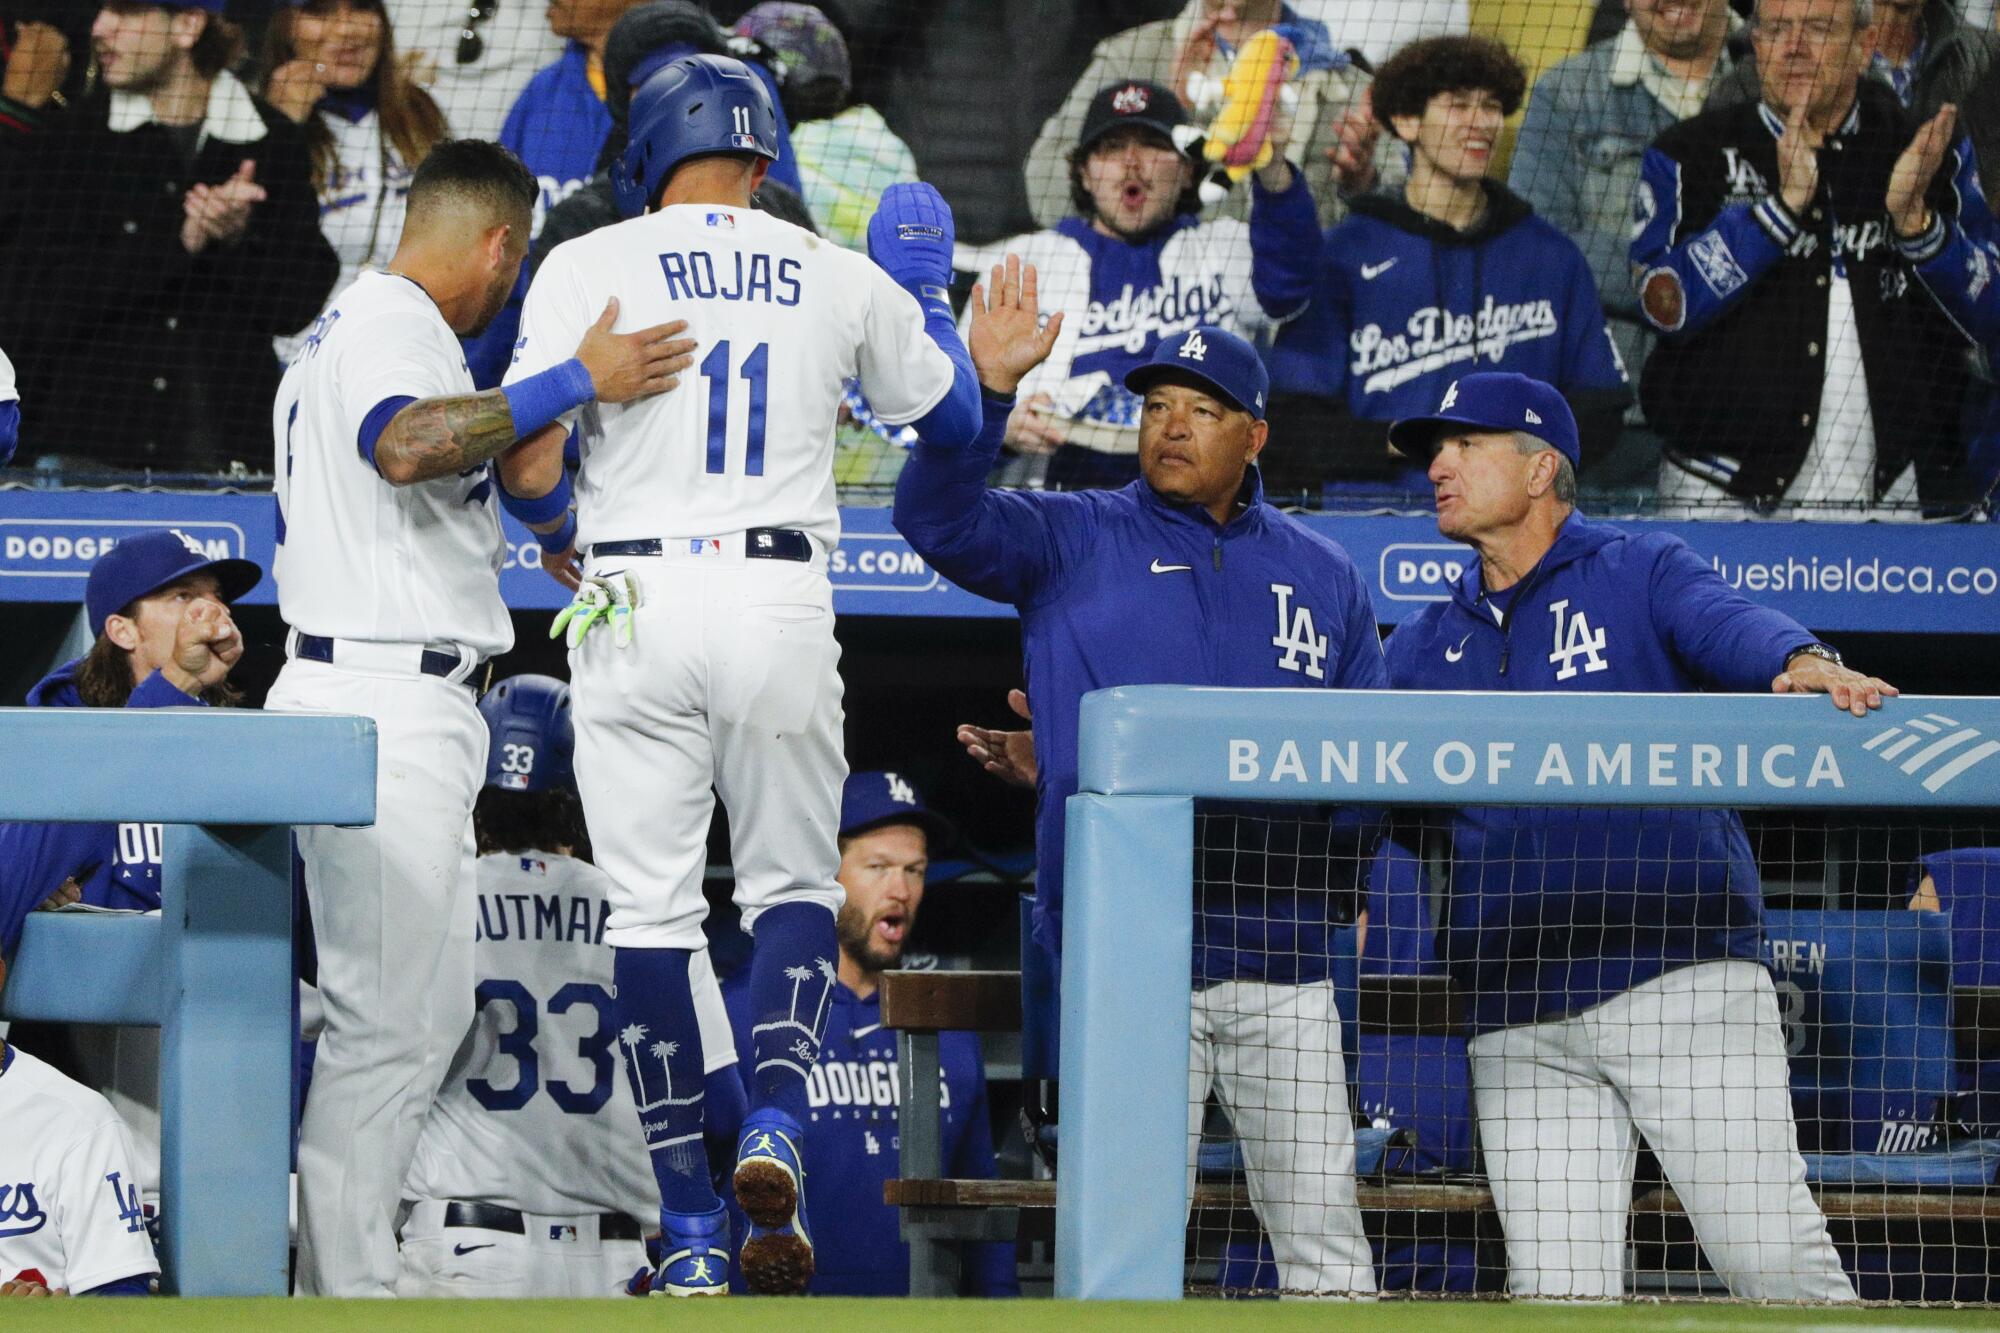 Dodgers shortstop Miguel Rojas (11) celebrates with manager Dave Roberts and teammates after scoring in the third inning.